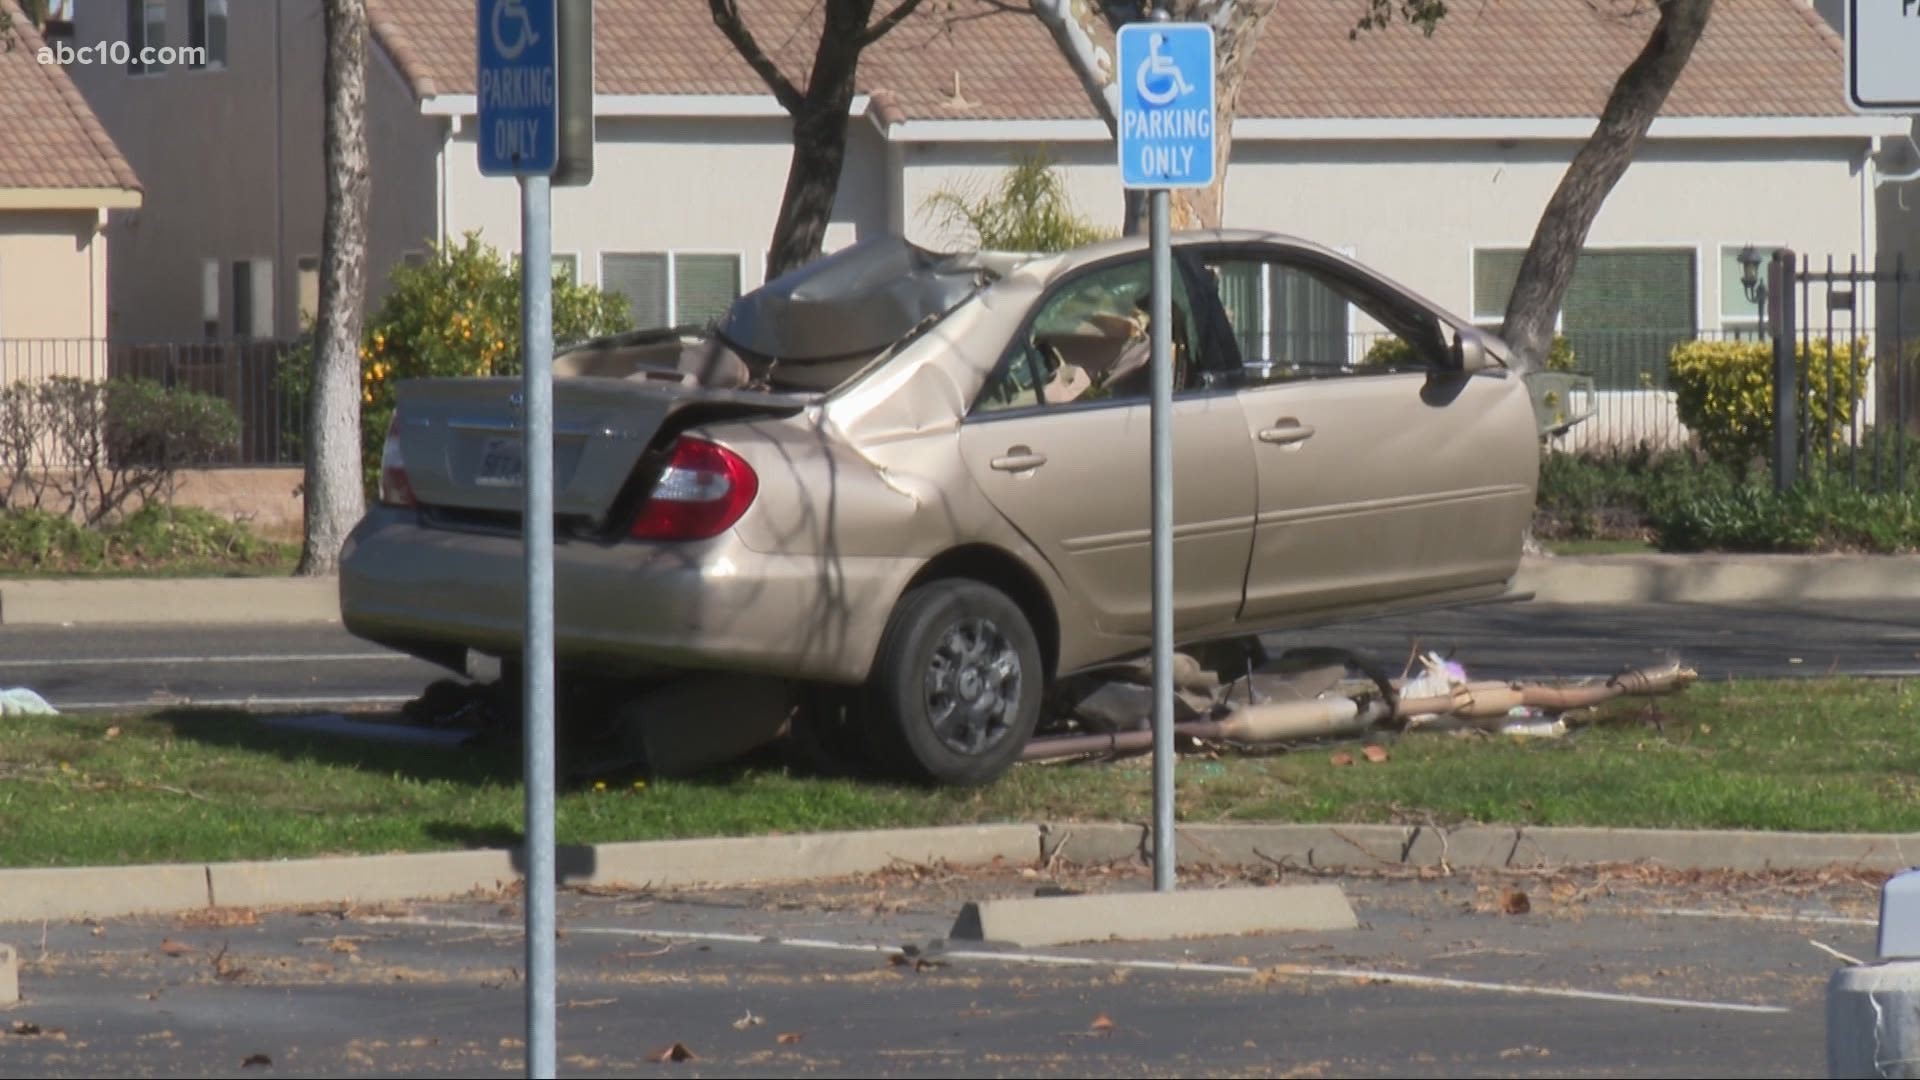 According to police, there were four people in the car, which happened around 4:45 a.m. Monday. The car split in two when it crashed into the tree.